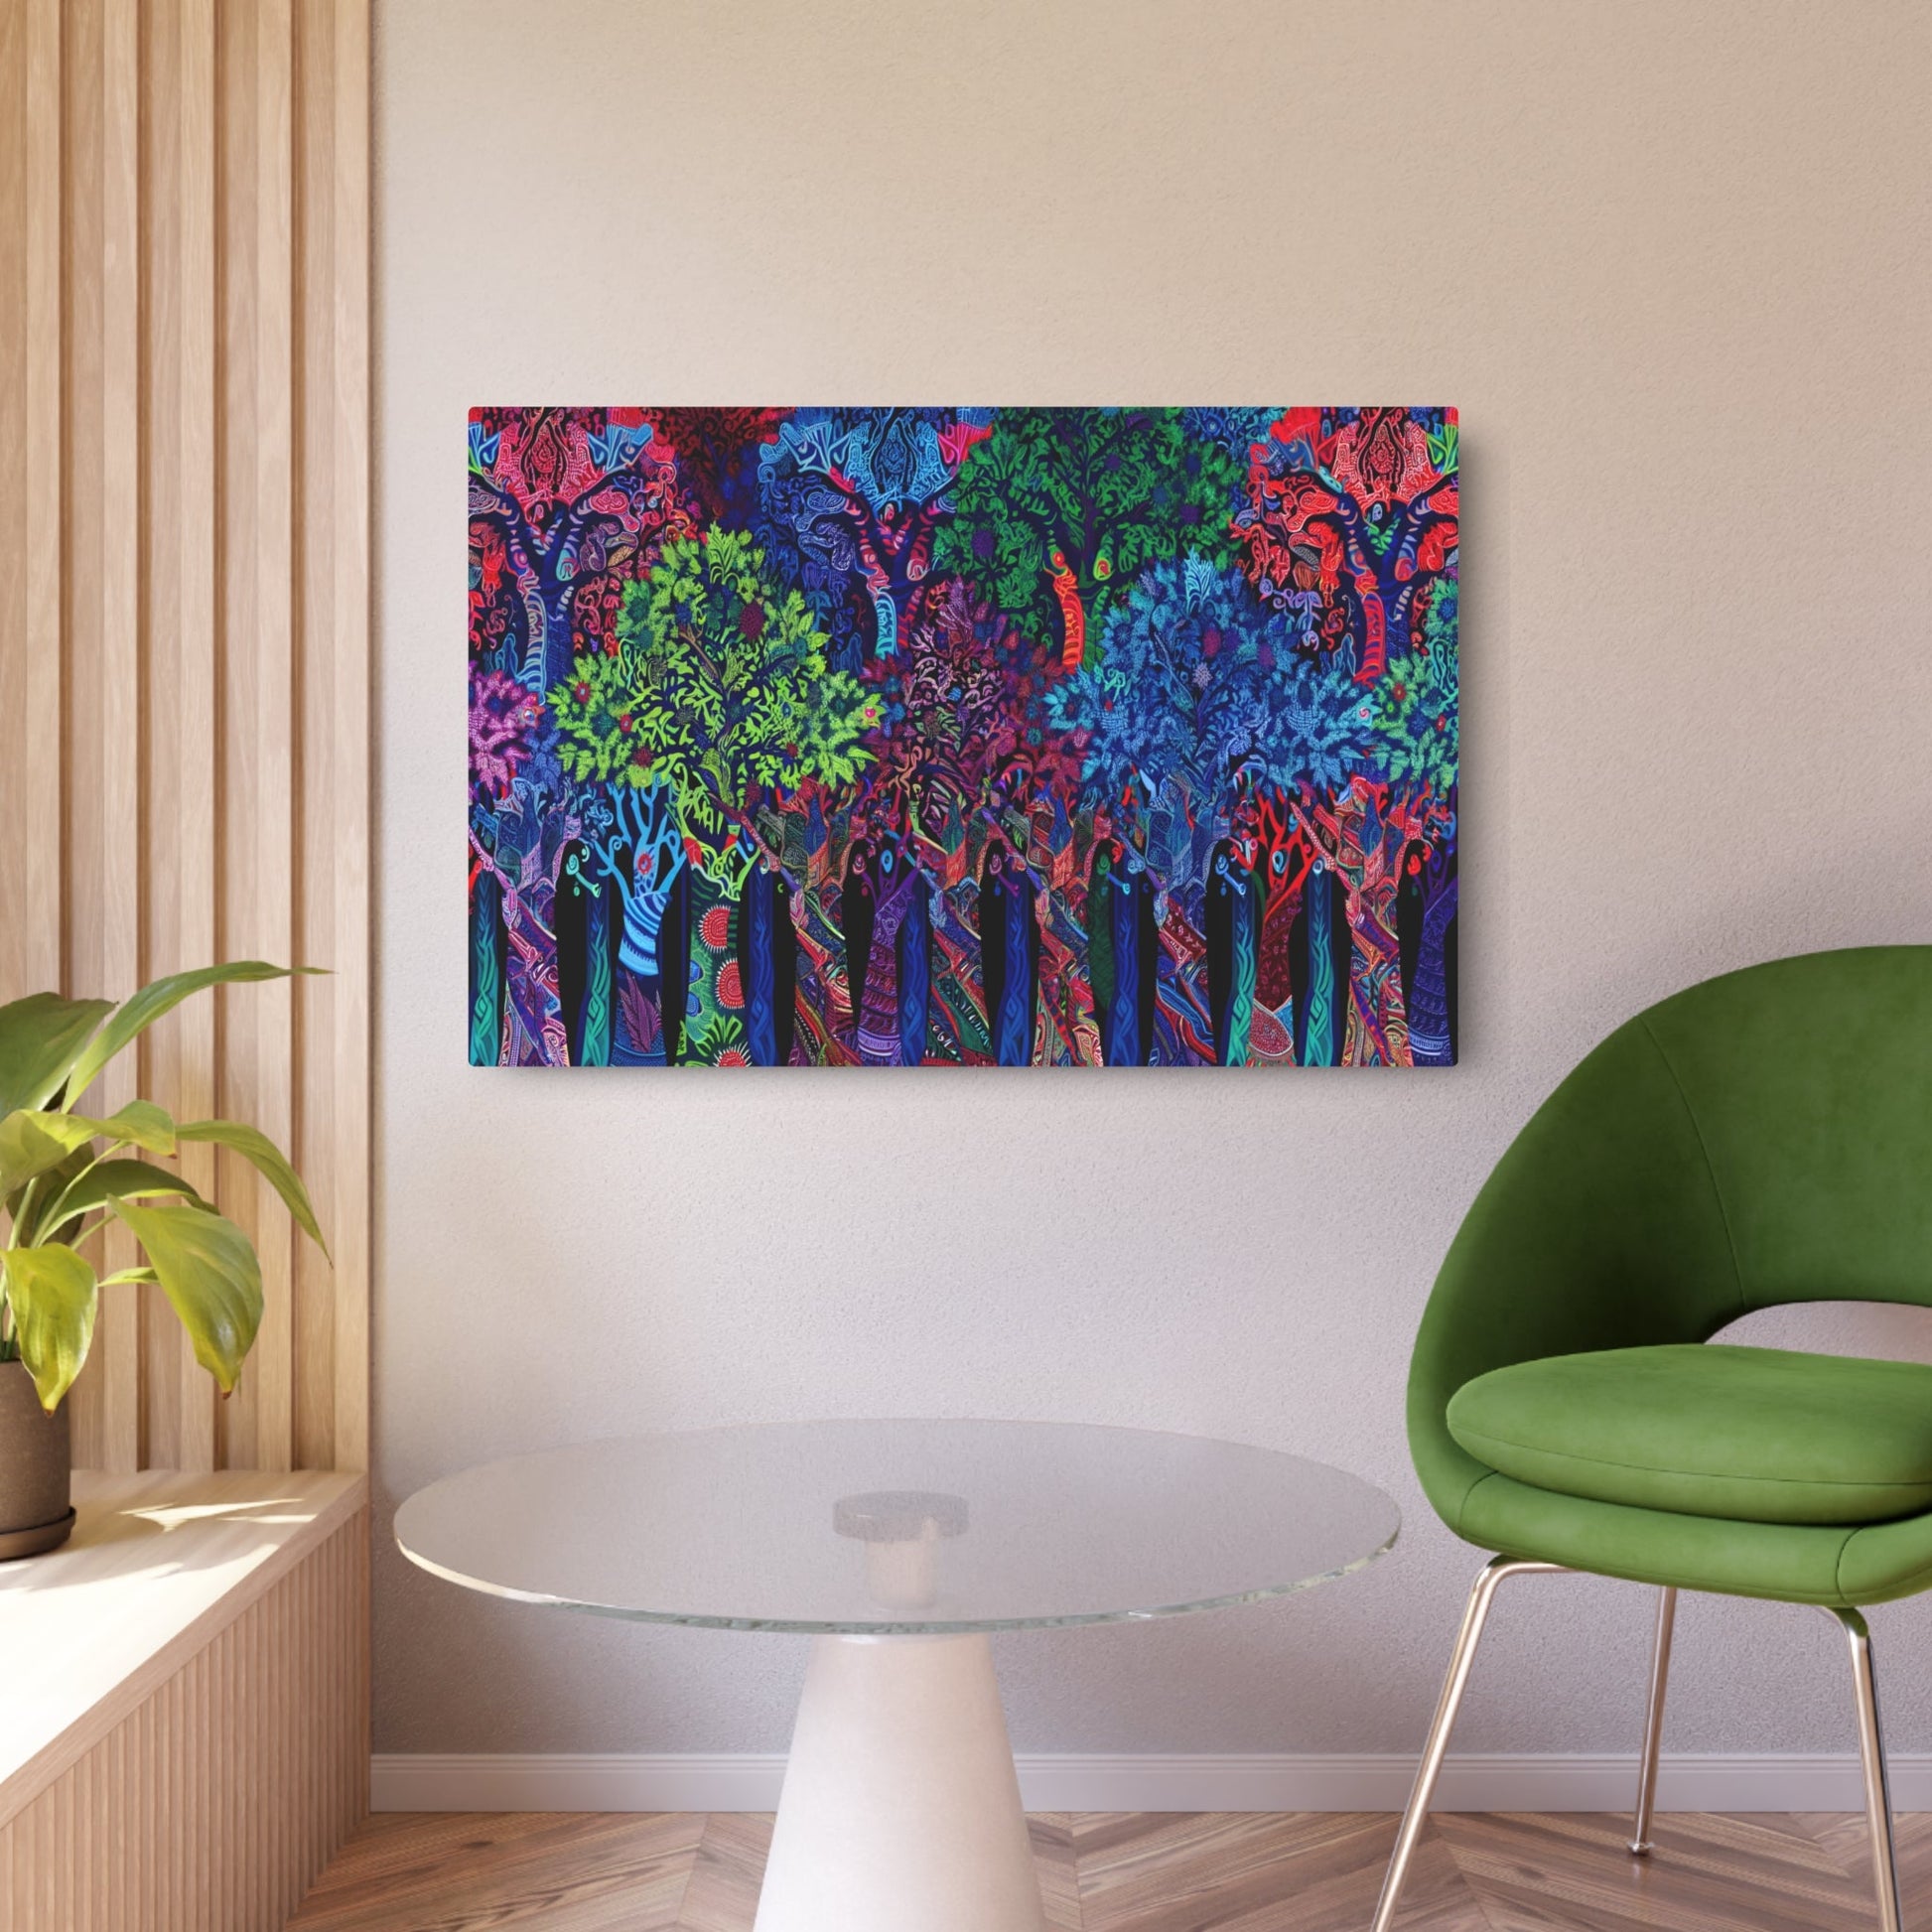 Metal Poster Art | "Indonesian Batik Art: Vibrant and Intricate Forest Scene with Detailed Patterned Trees - Authentic Non-Western Global Style Artwork" - Metal Poster Art 36″ x 24″ (Horizontal) 0.12''